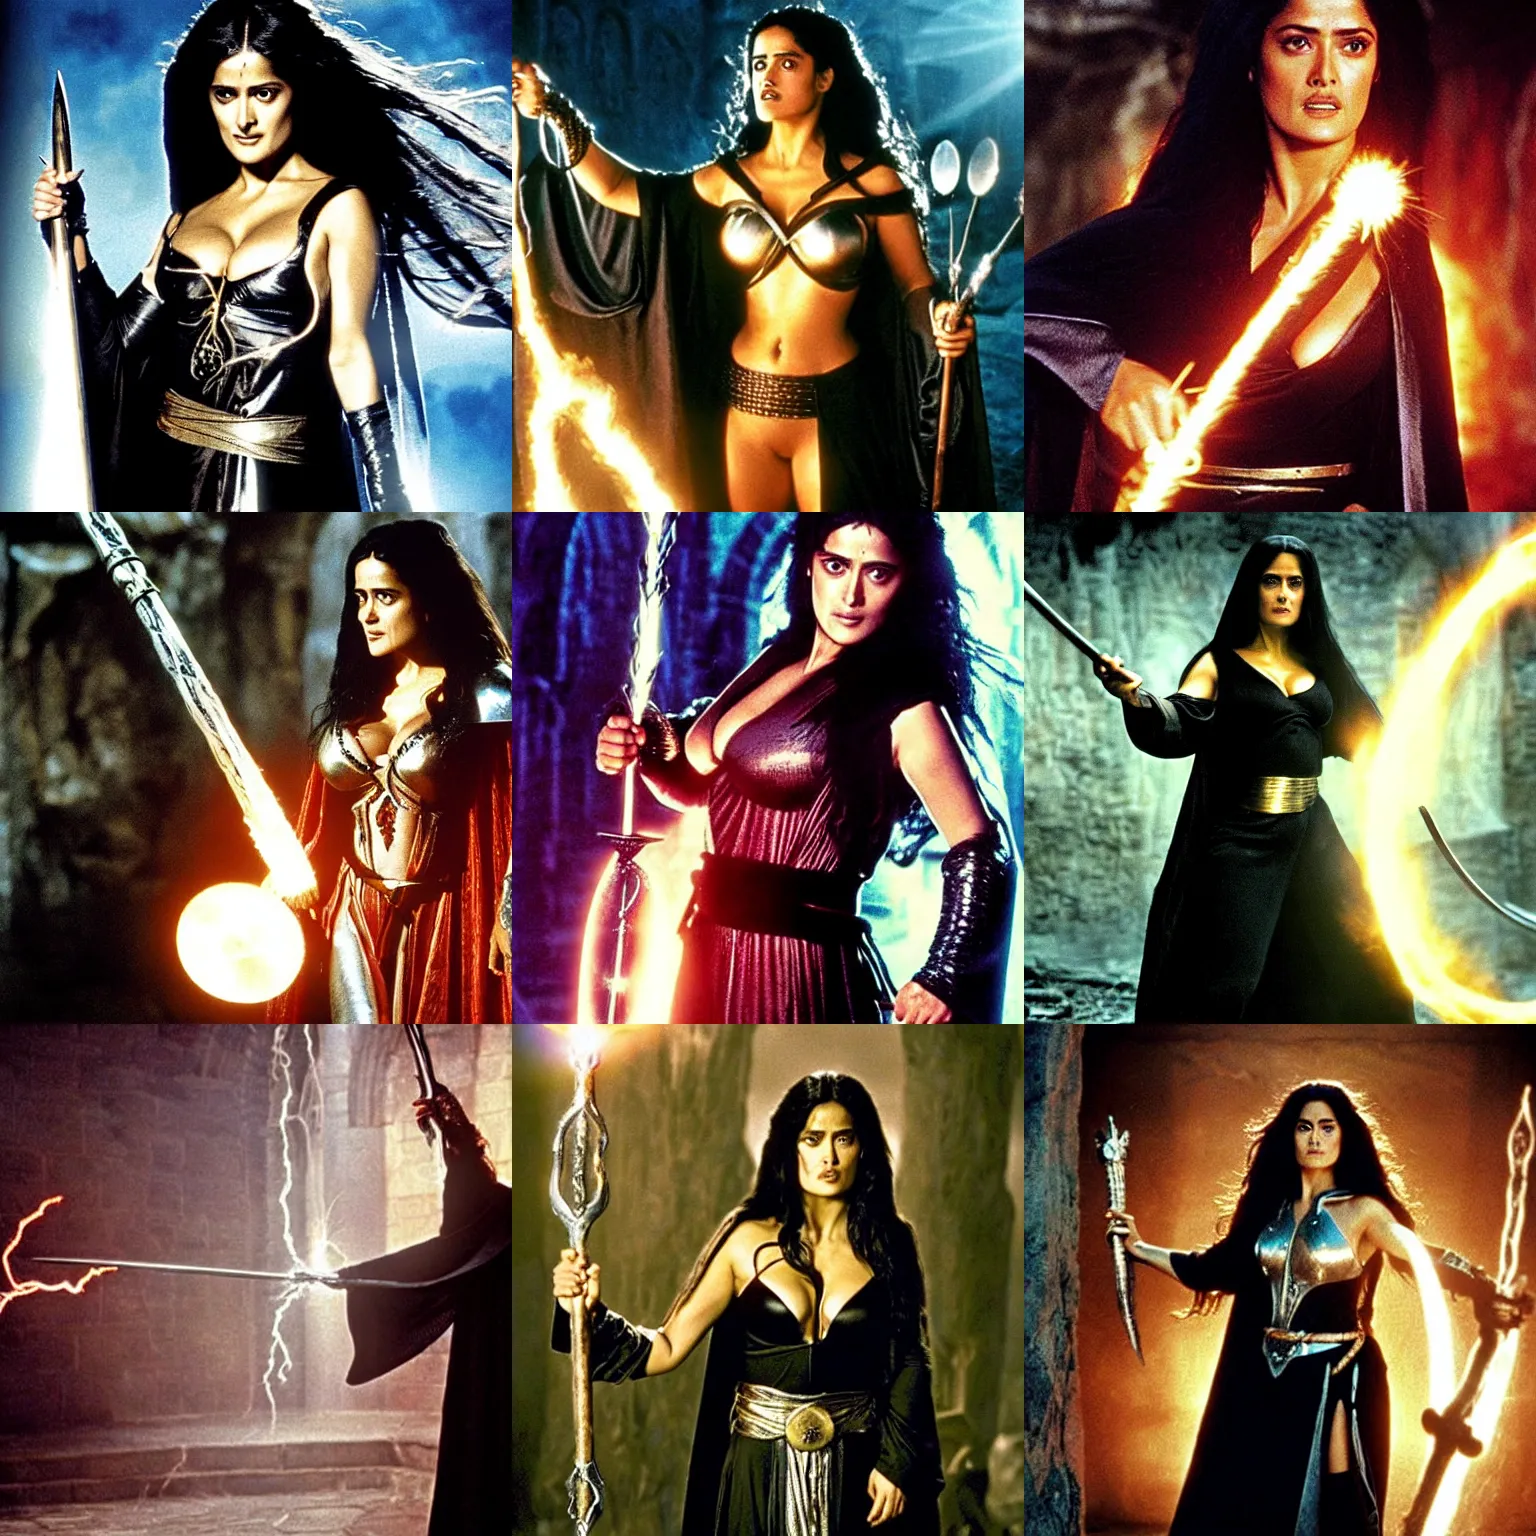 Prompt: epic photo of salma hayek as beautiful medieval sorceress with very long black hair wearing a black satin robe and metal belt, battle scene, holding her wizard staff electricity emanating from it, sweaty, in the film flash excalibur 1 9 8 1, movie still, cinematography by david fincher